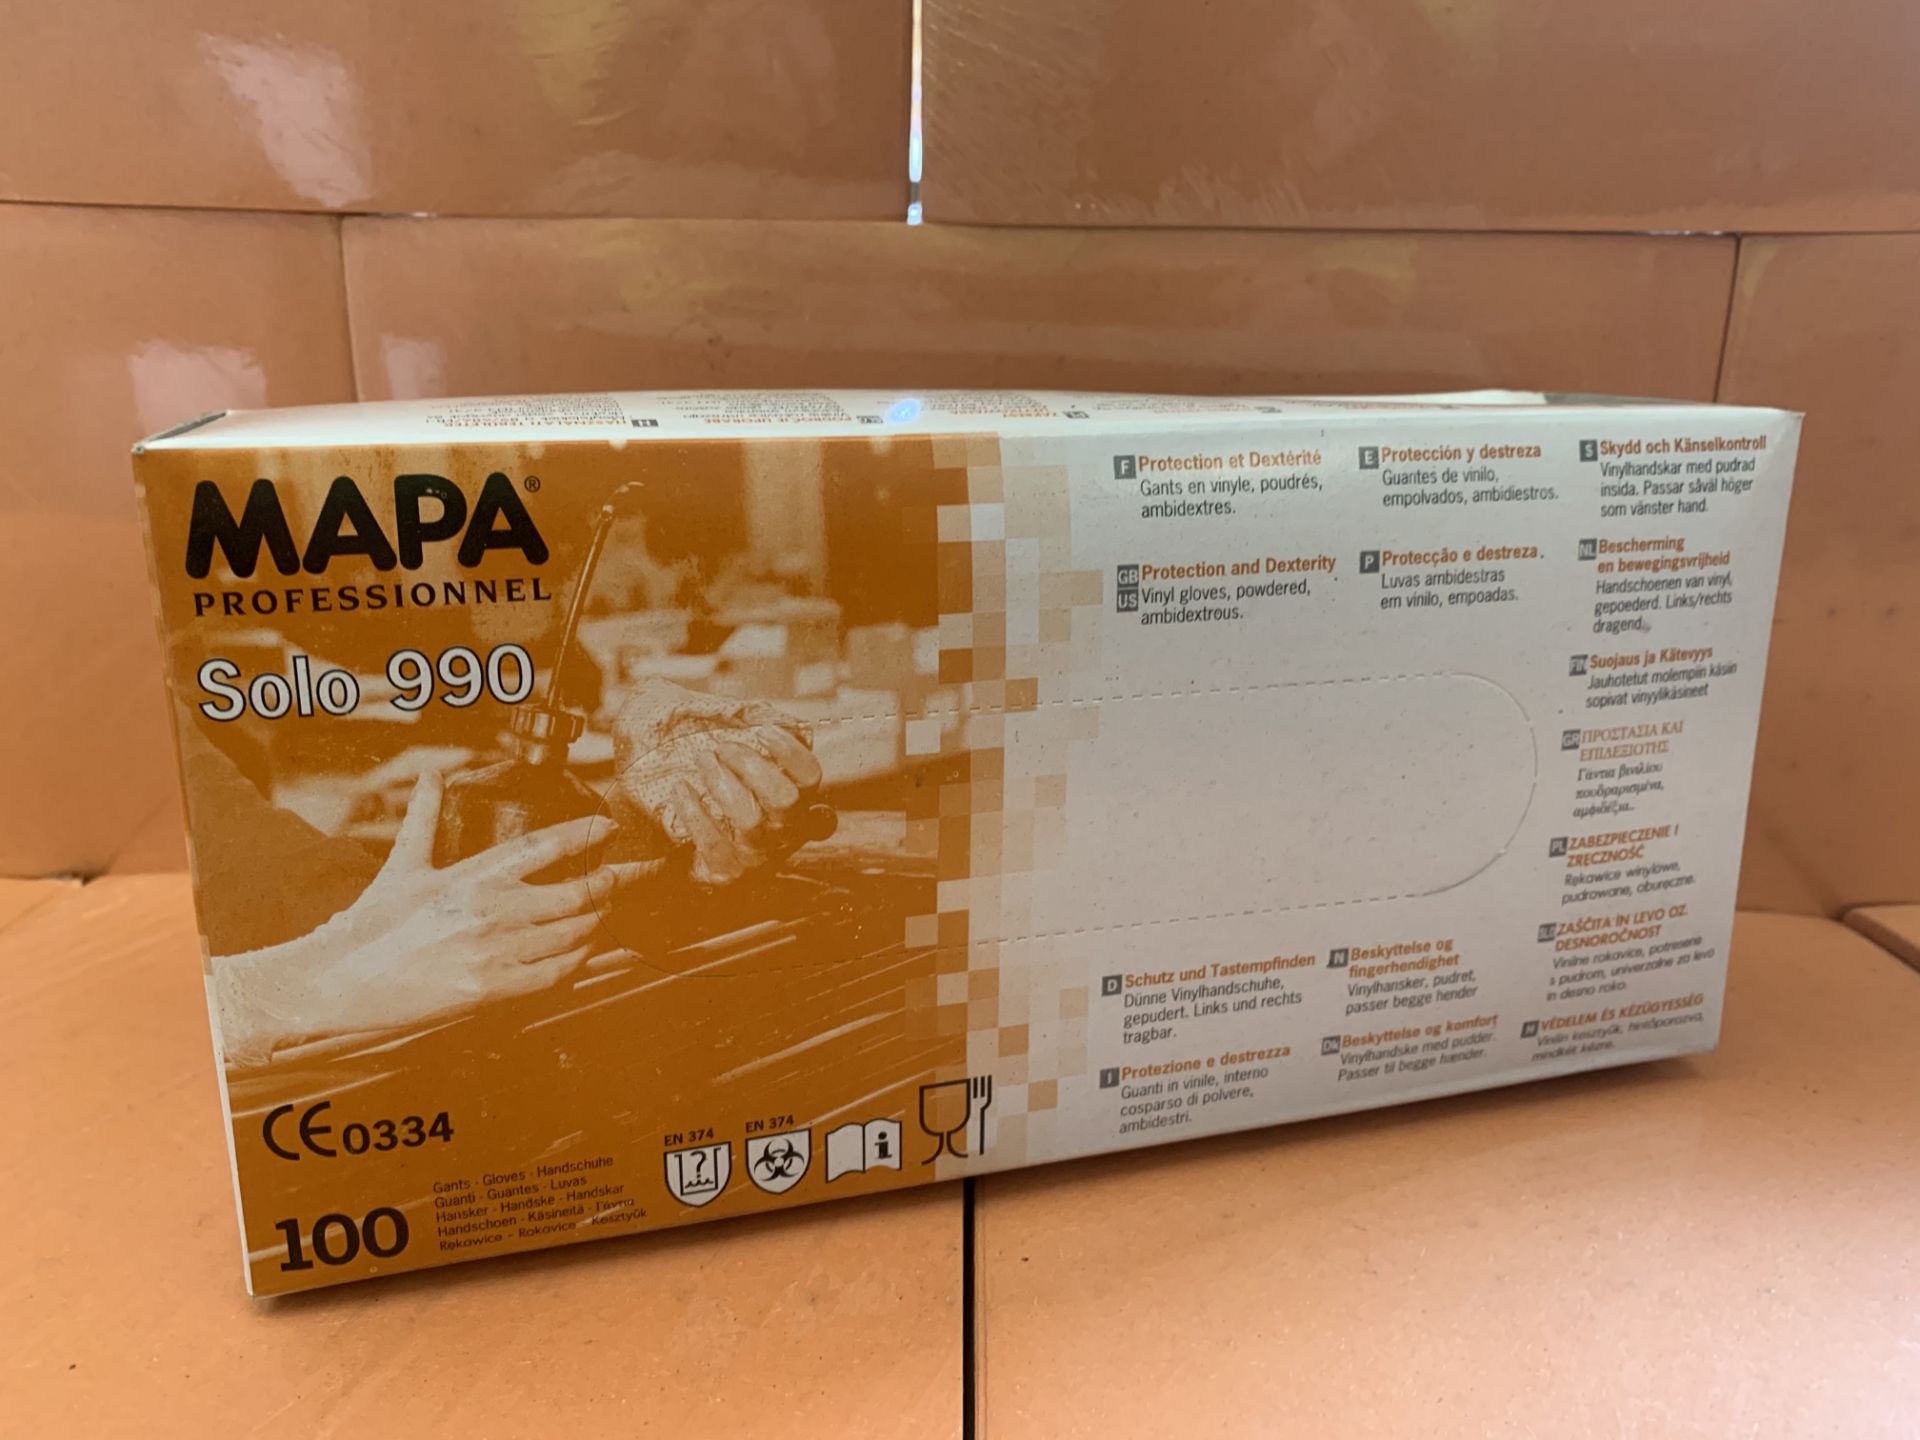 10 X PACKS OF 100 MAPA SOLO 990 PROFESSIONAL GLOVES